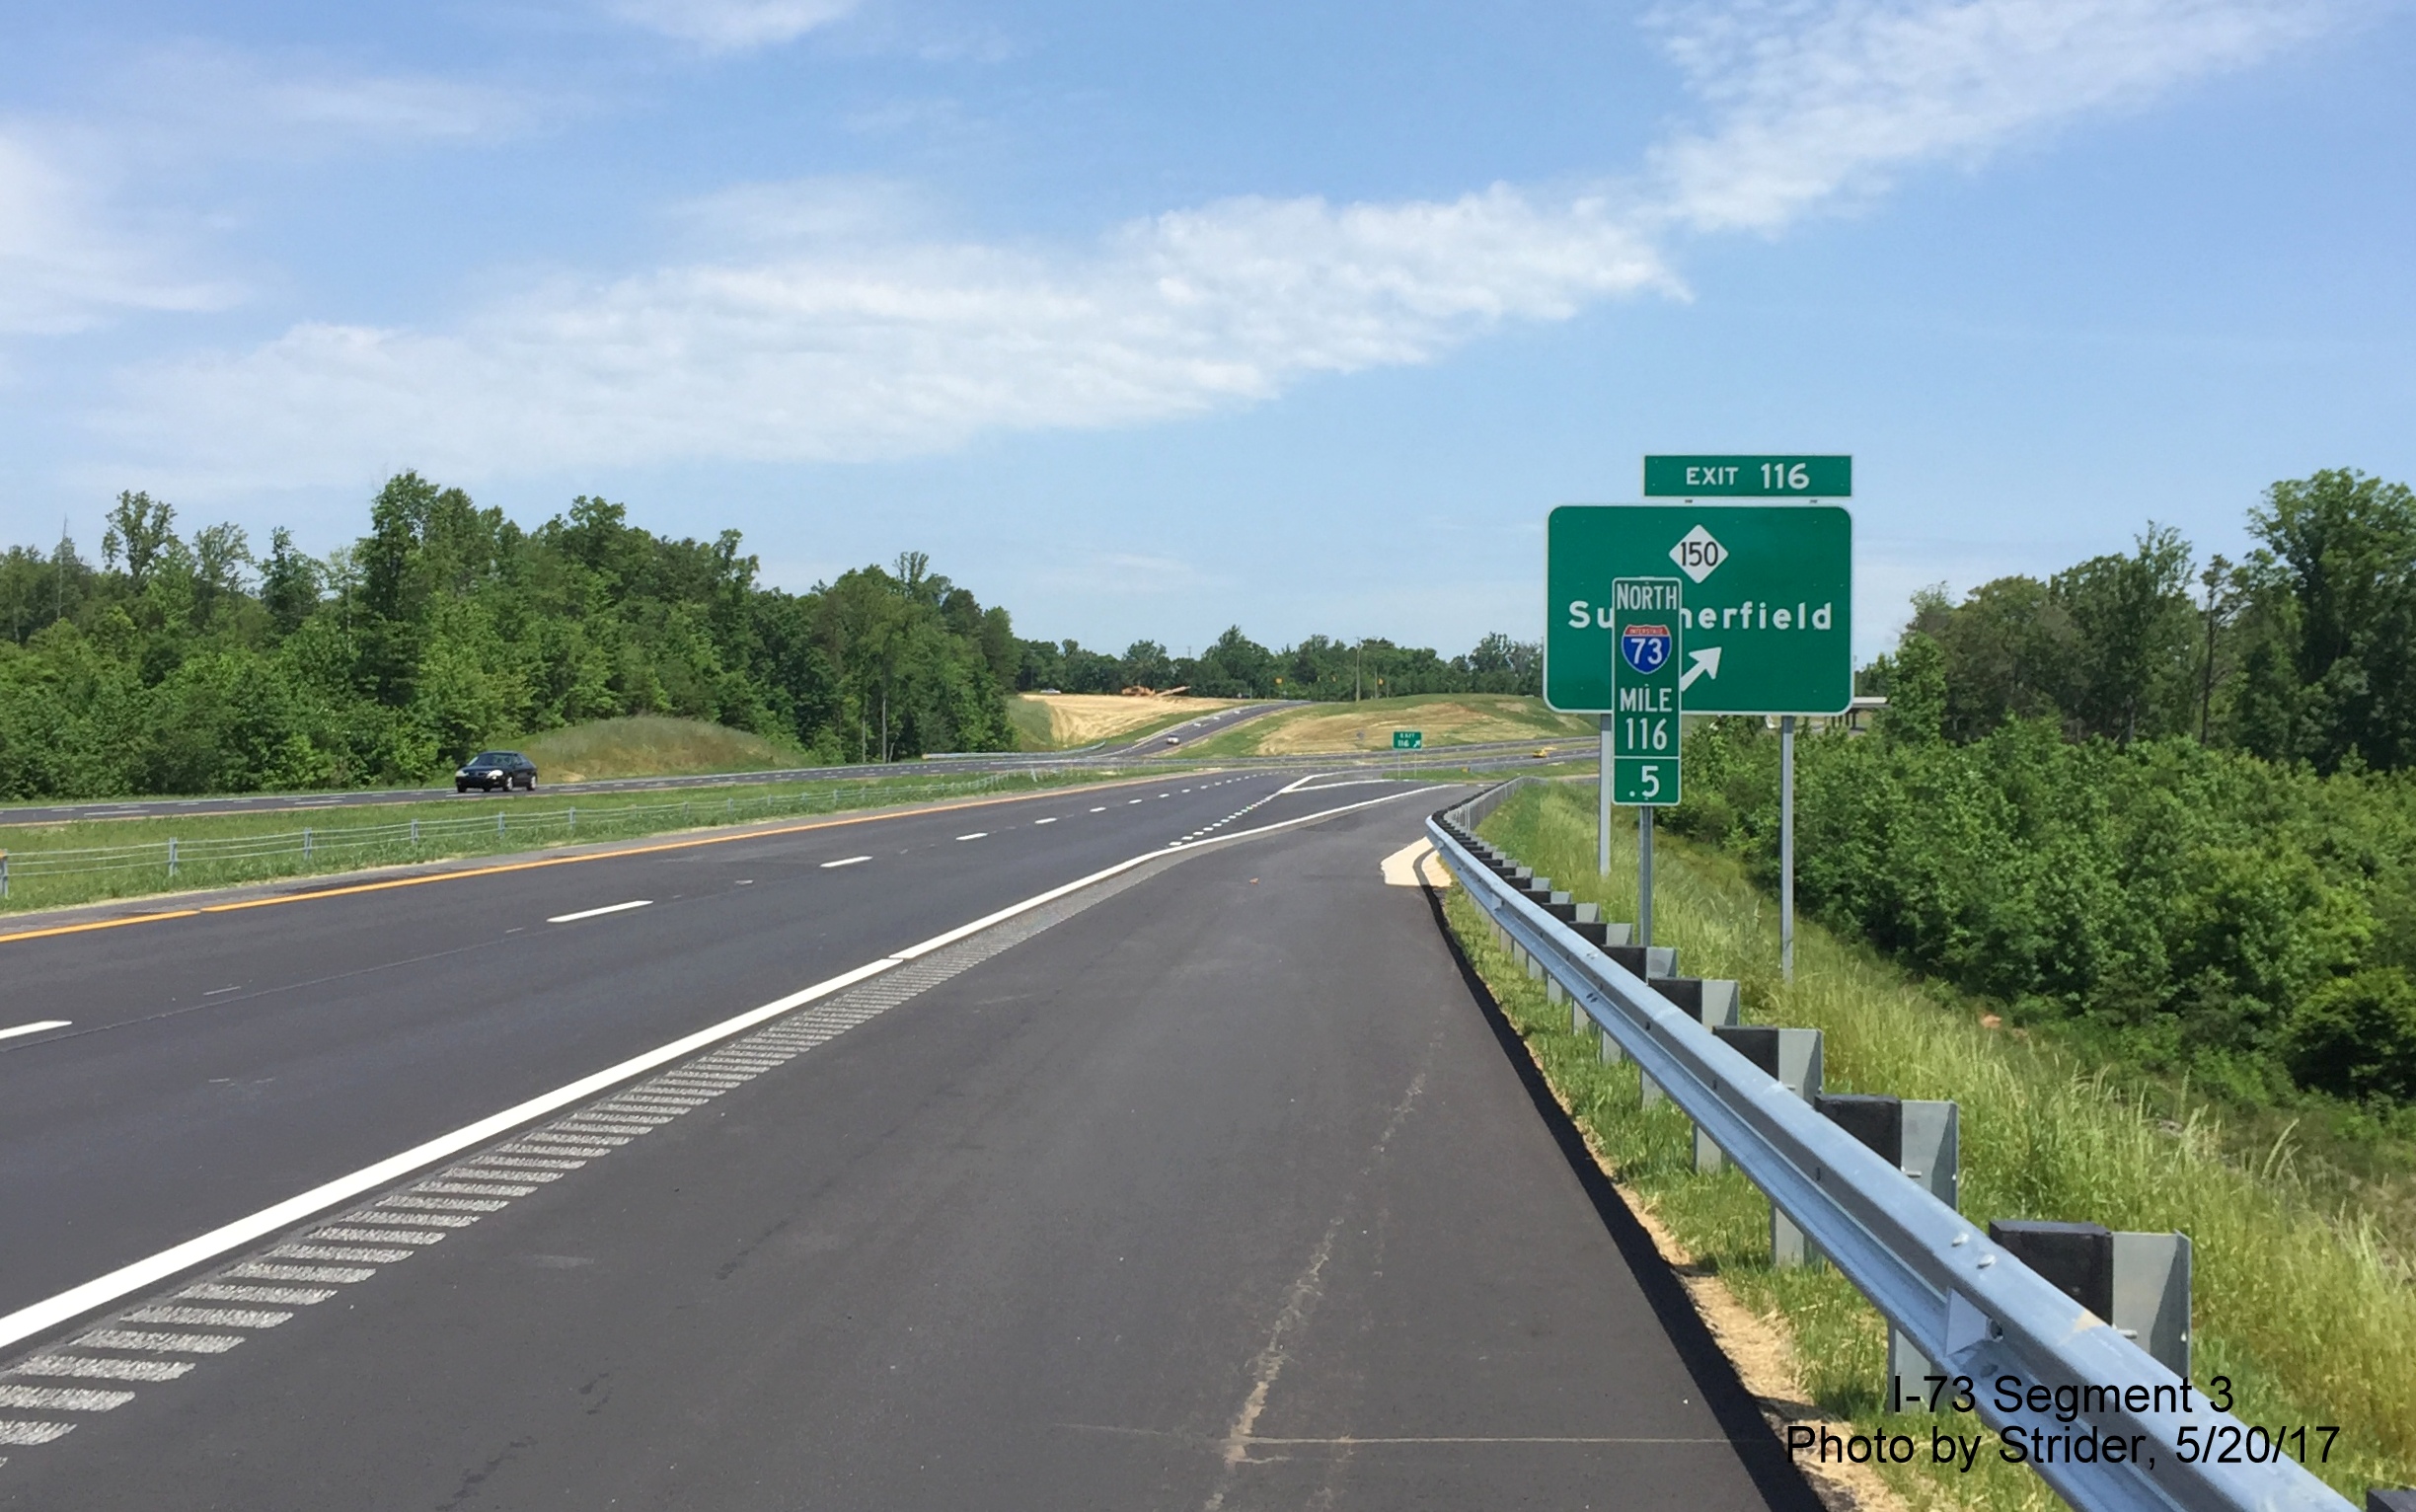 Image taken of NC 150 Exit sign just beyond Mile marker 116.5 on I-73 North in Summerfield, by Strider